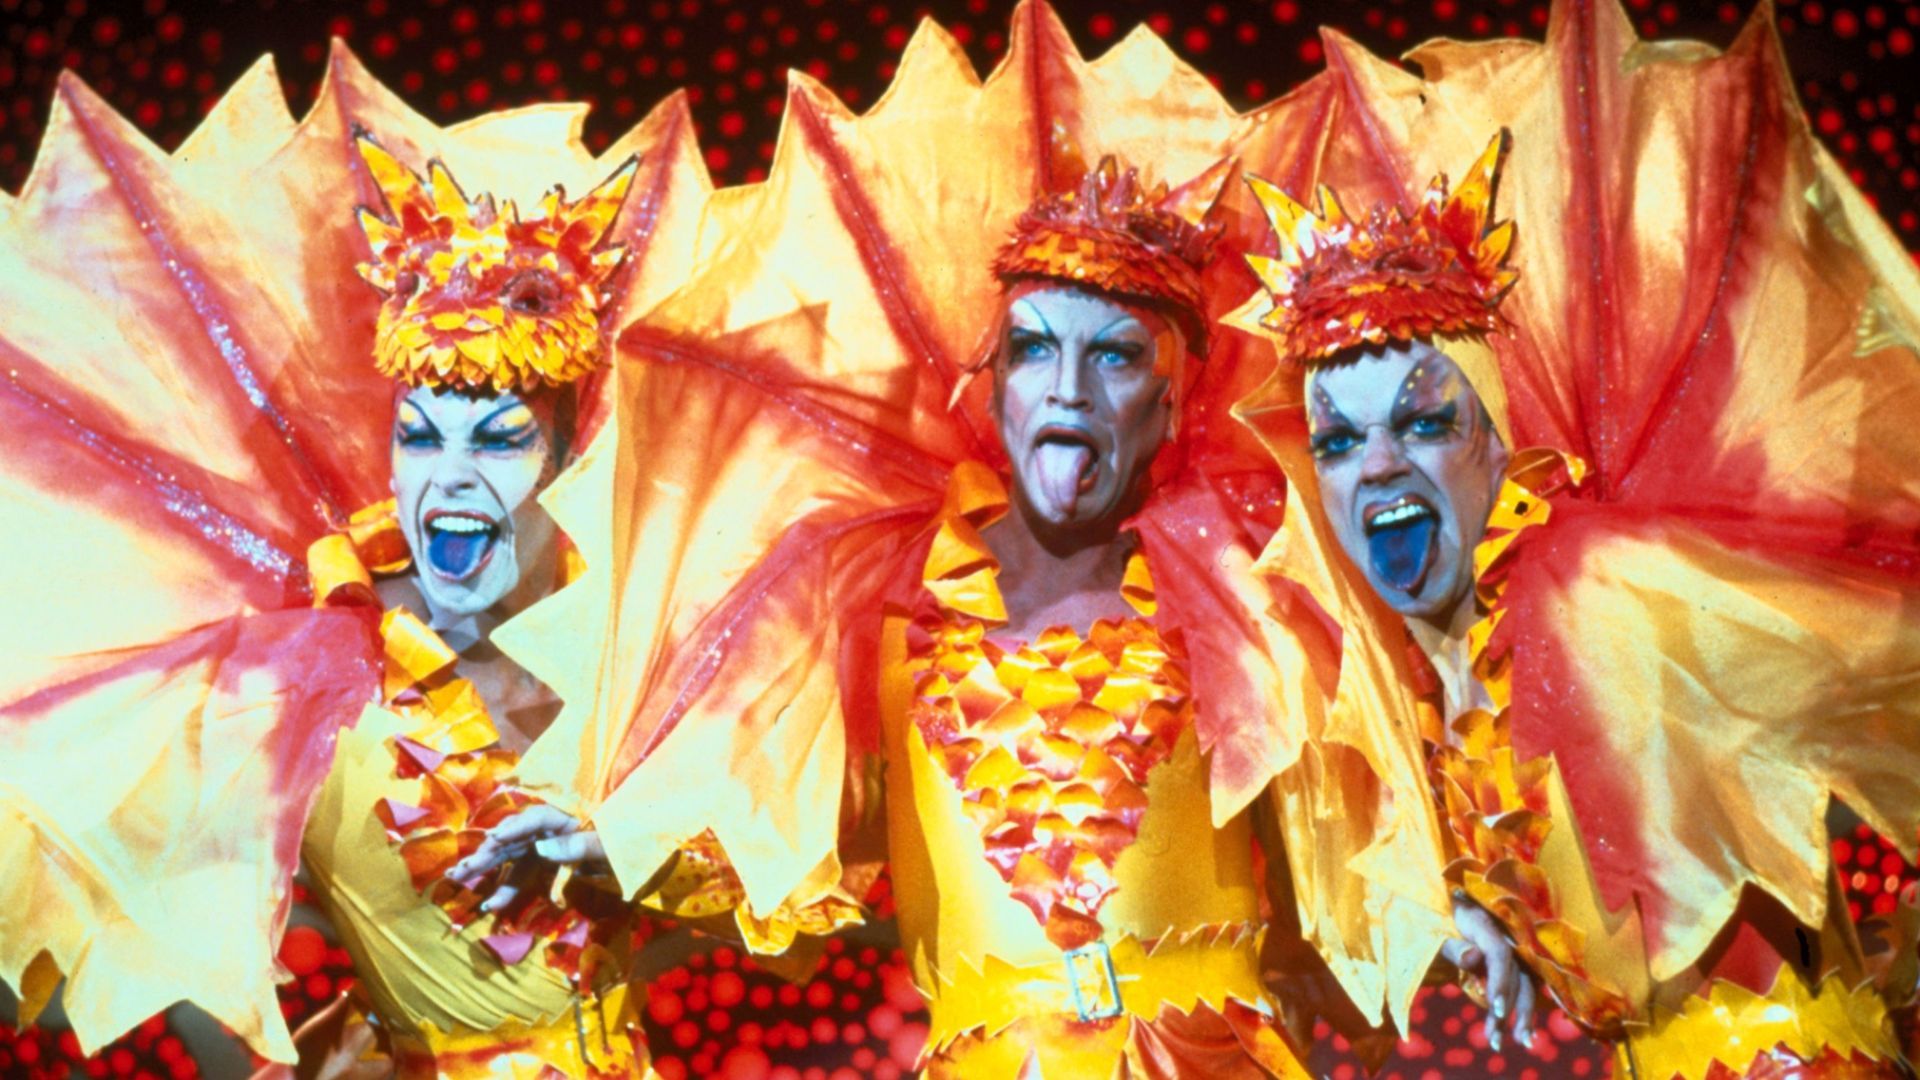 Hugo Weaving, Guy Pearce, and Terence Stamp in The Adventures of Priscilla, Queen of the Desert